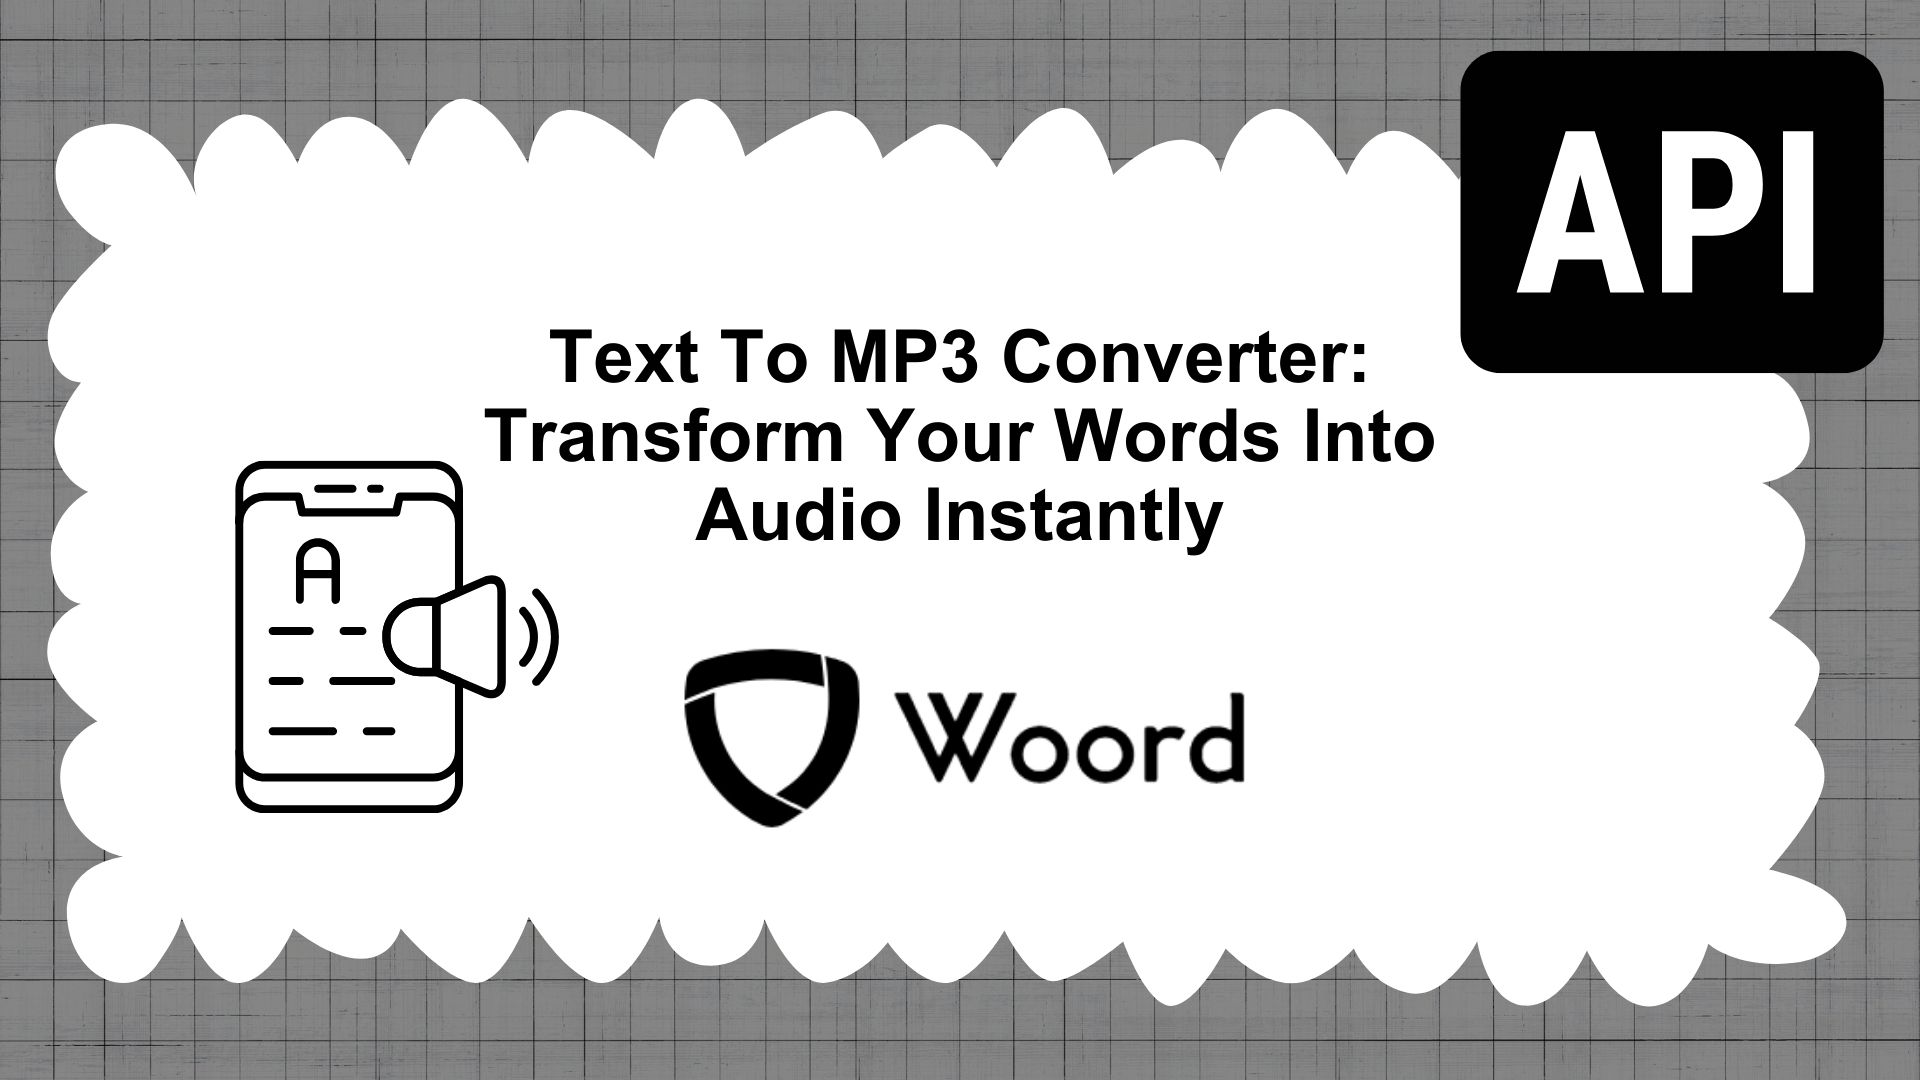 Text To MP3 Converter: Transform Your Words Into Audio Instantly